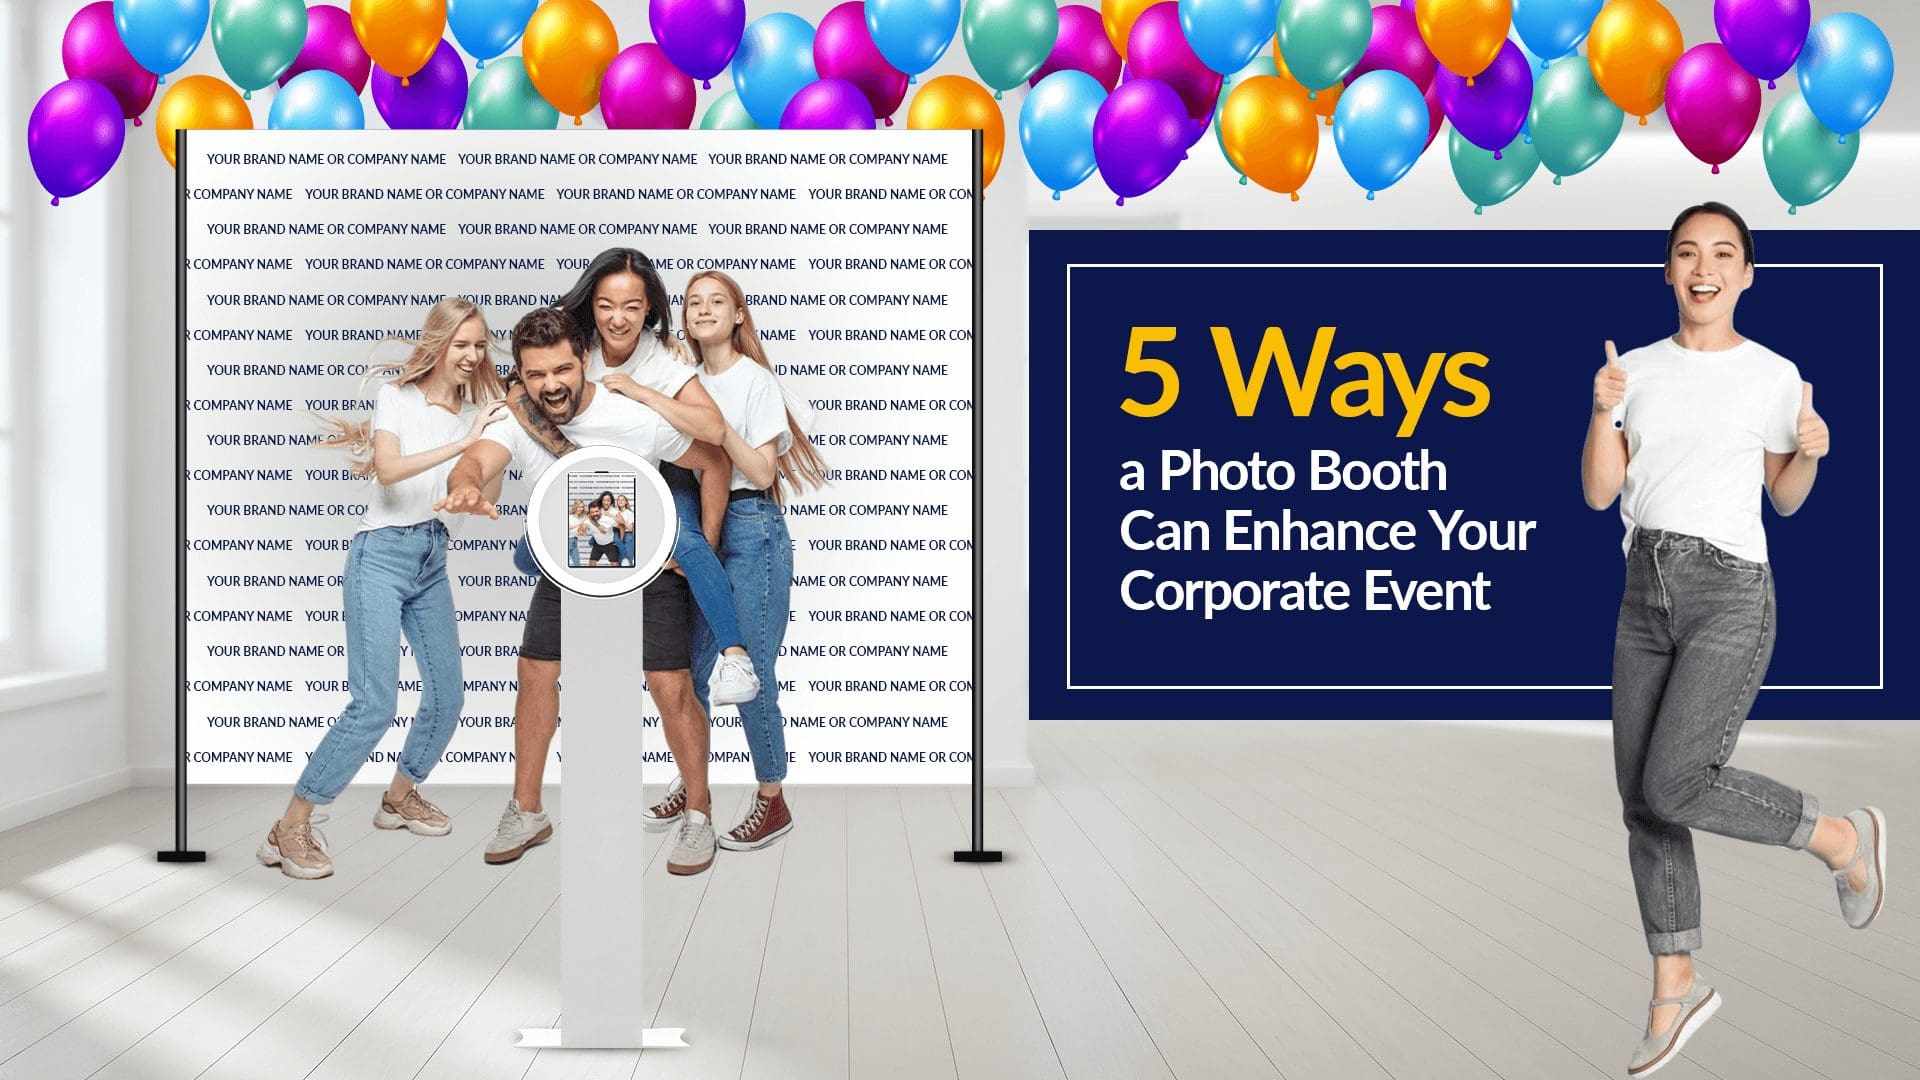 5 ways a photo booth can enhance your corporate event